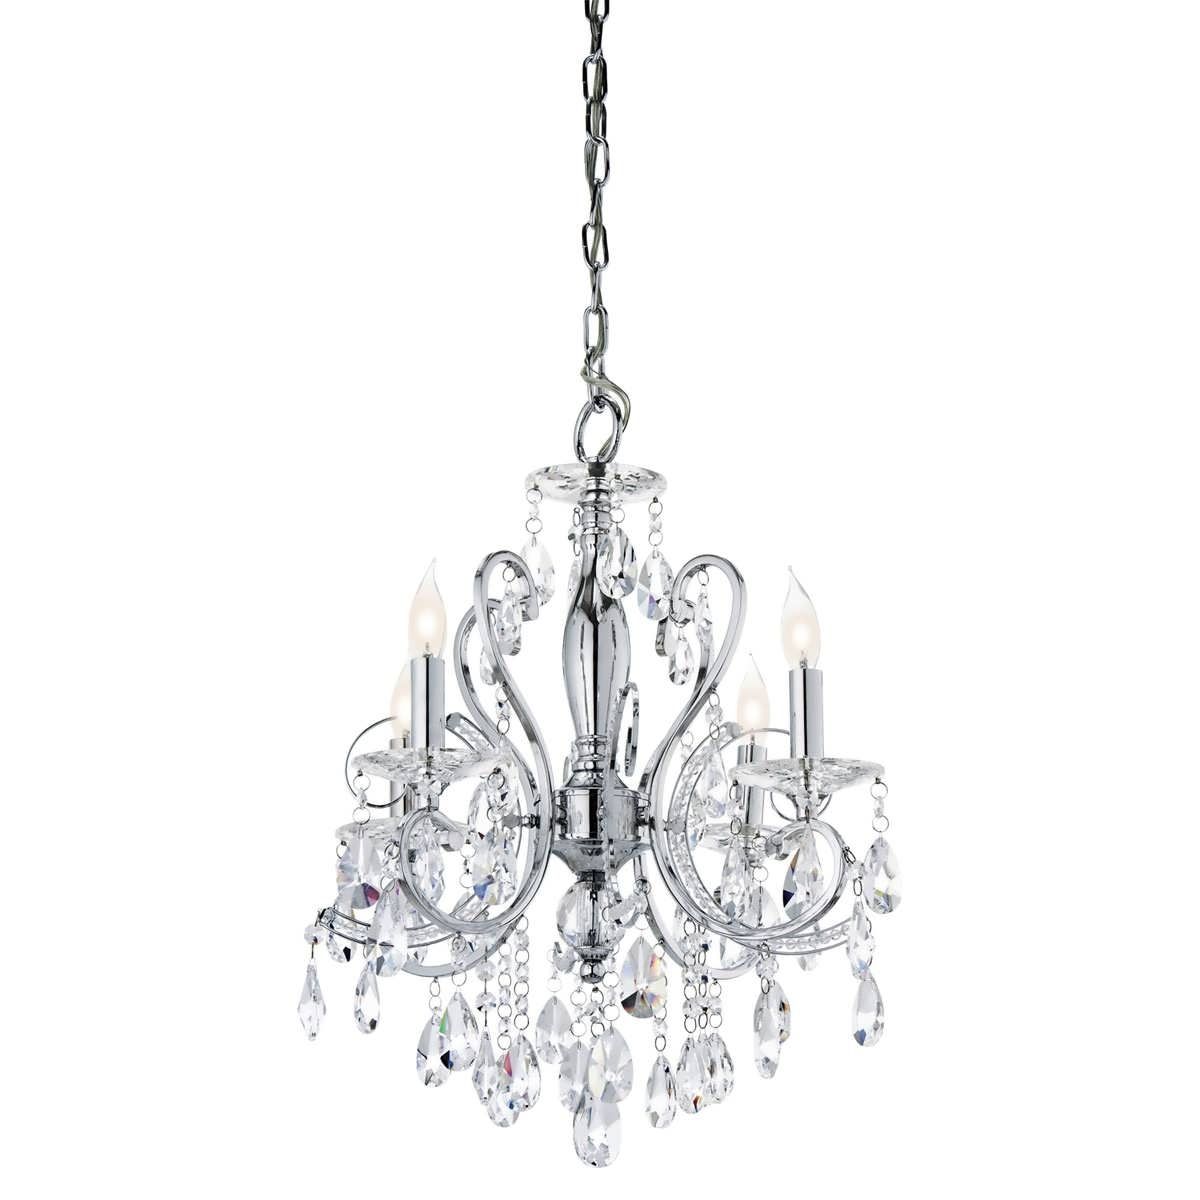 Recent Tiny Chandeliers Pertaining To Chandelier : Small Chandelier Lights Simple Chandelier Large (View 11 of 15)